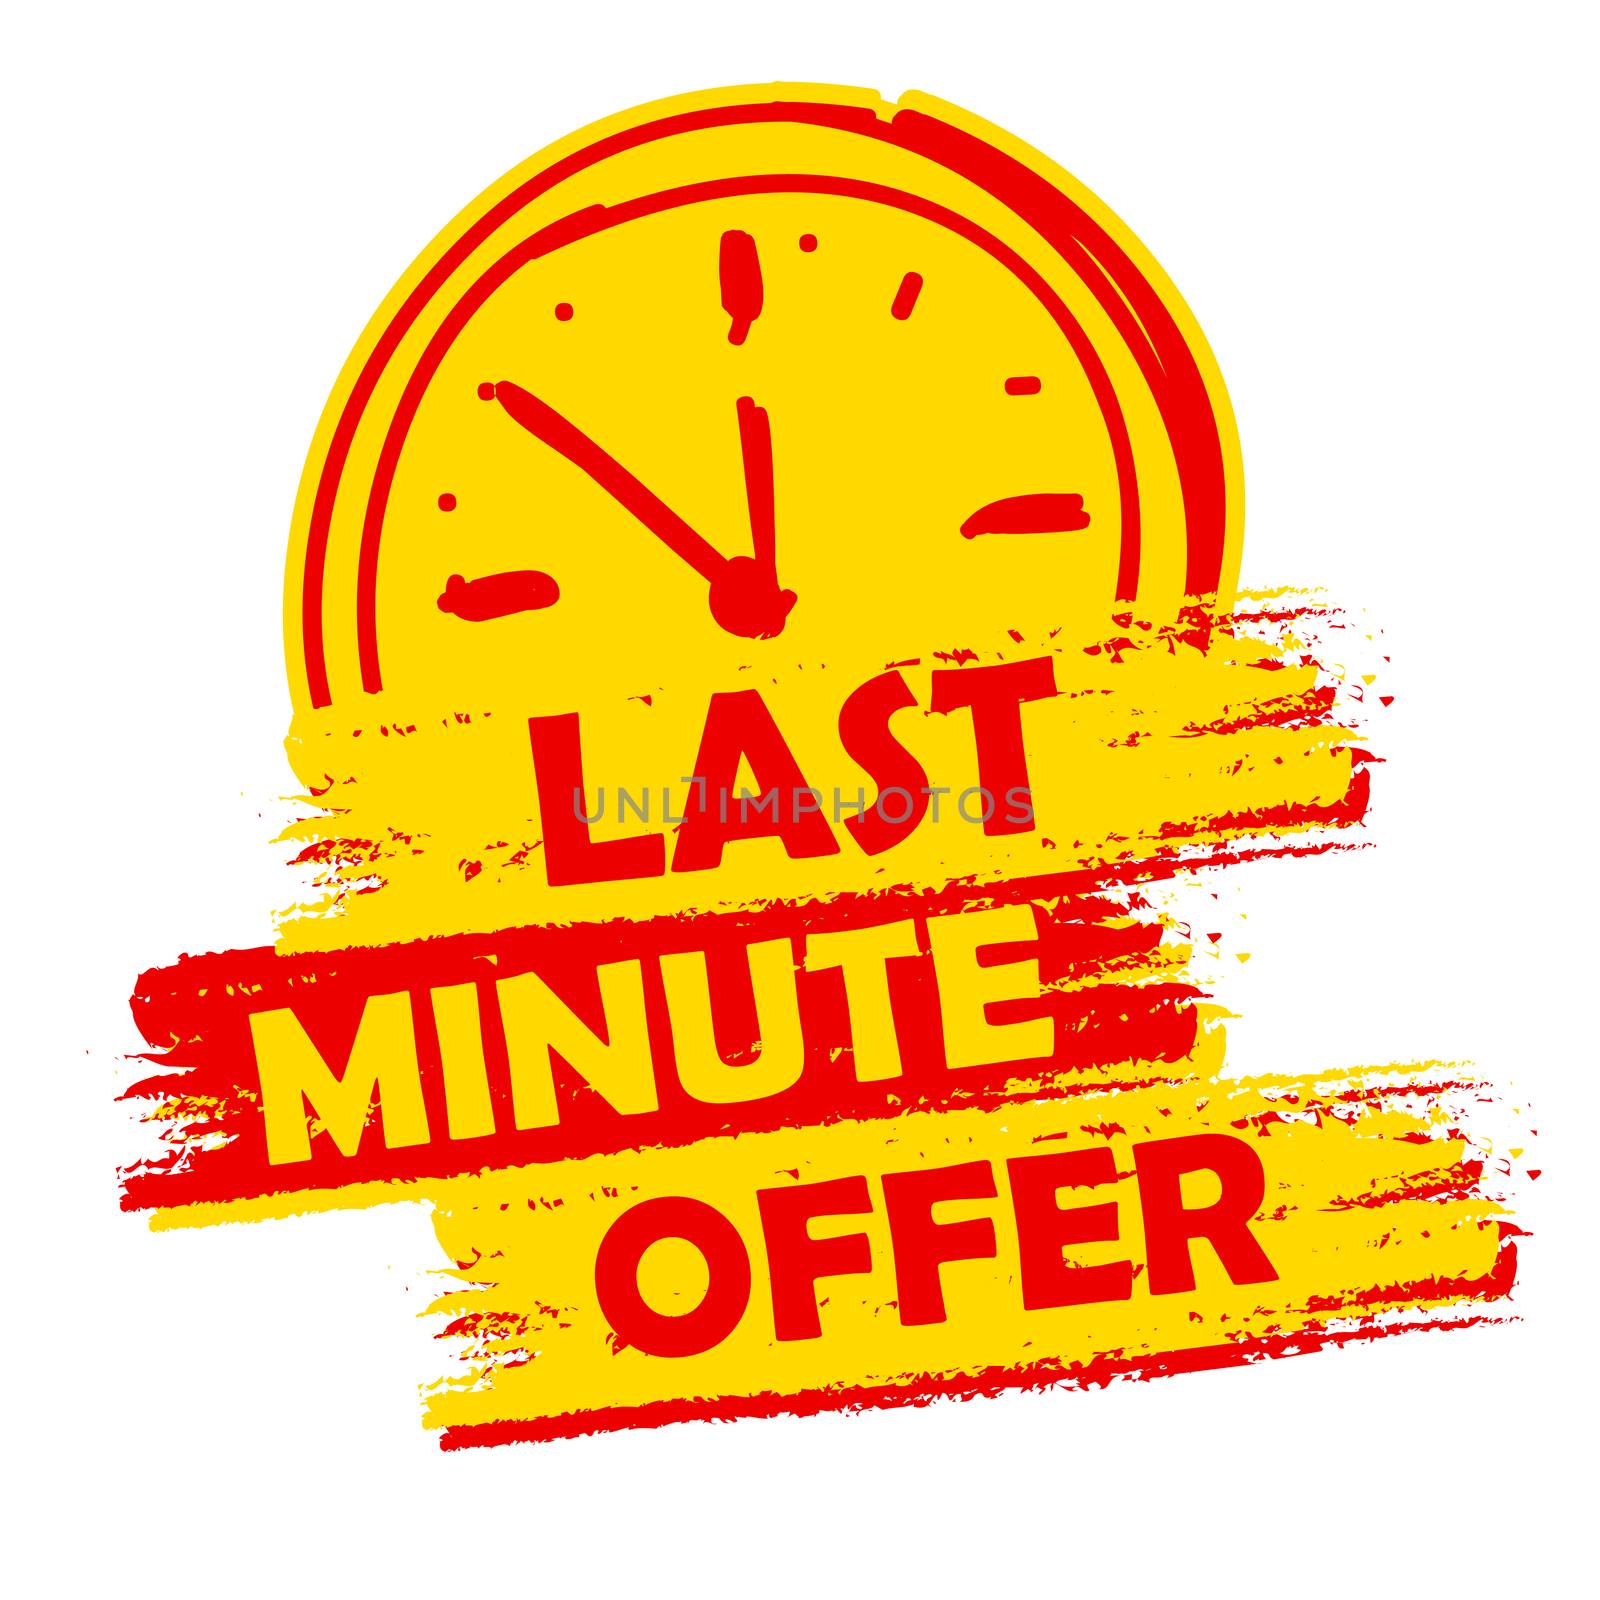 last minute offer with clock sign banner - text in yellow and red drawn label with symbol, business commerce shopping concept